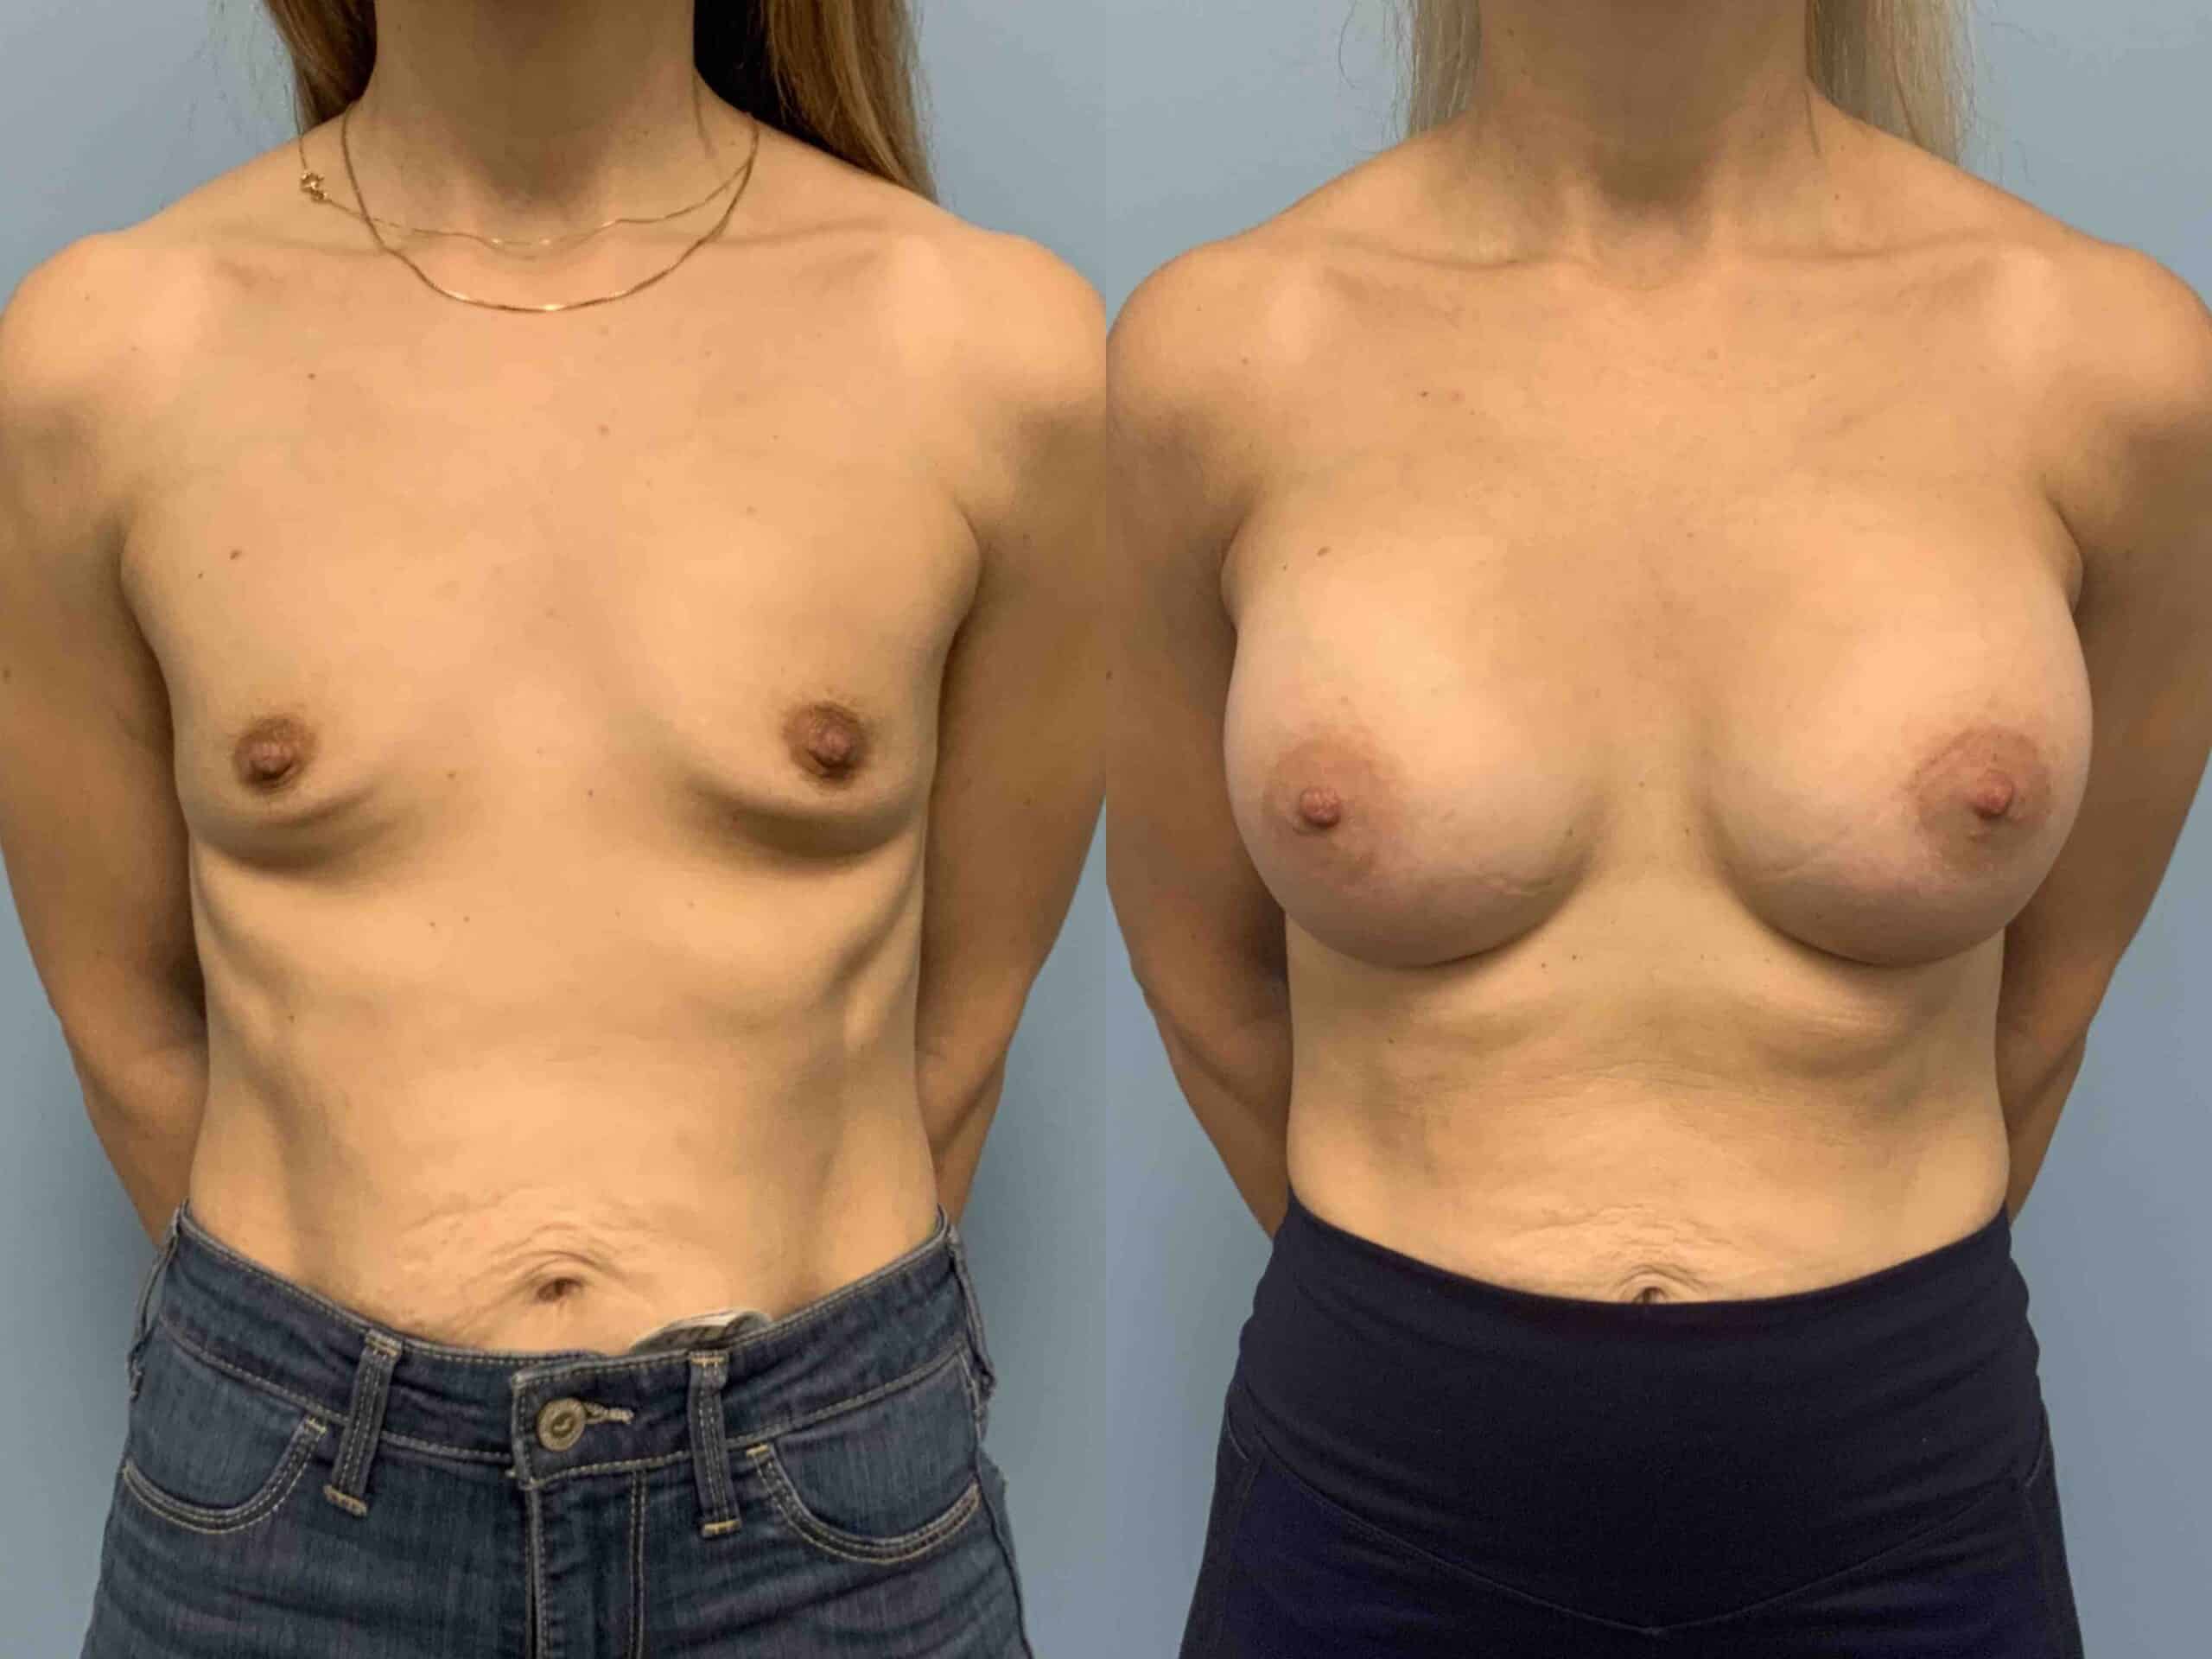 Before and after, patient 2 mo post op from Breast Augmentation, Level III Muscle Release procedures performed by Dr. Paul Vanek